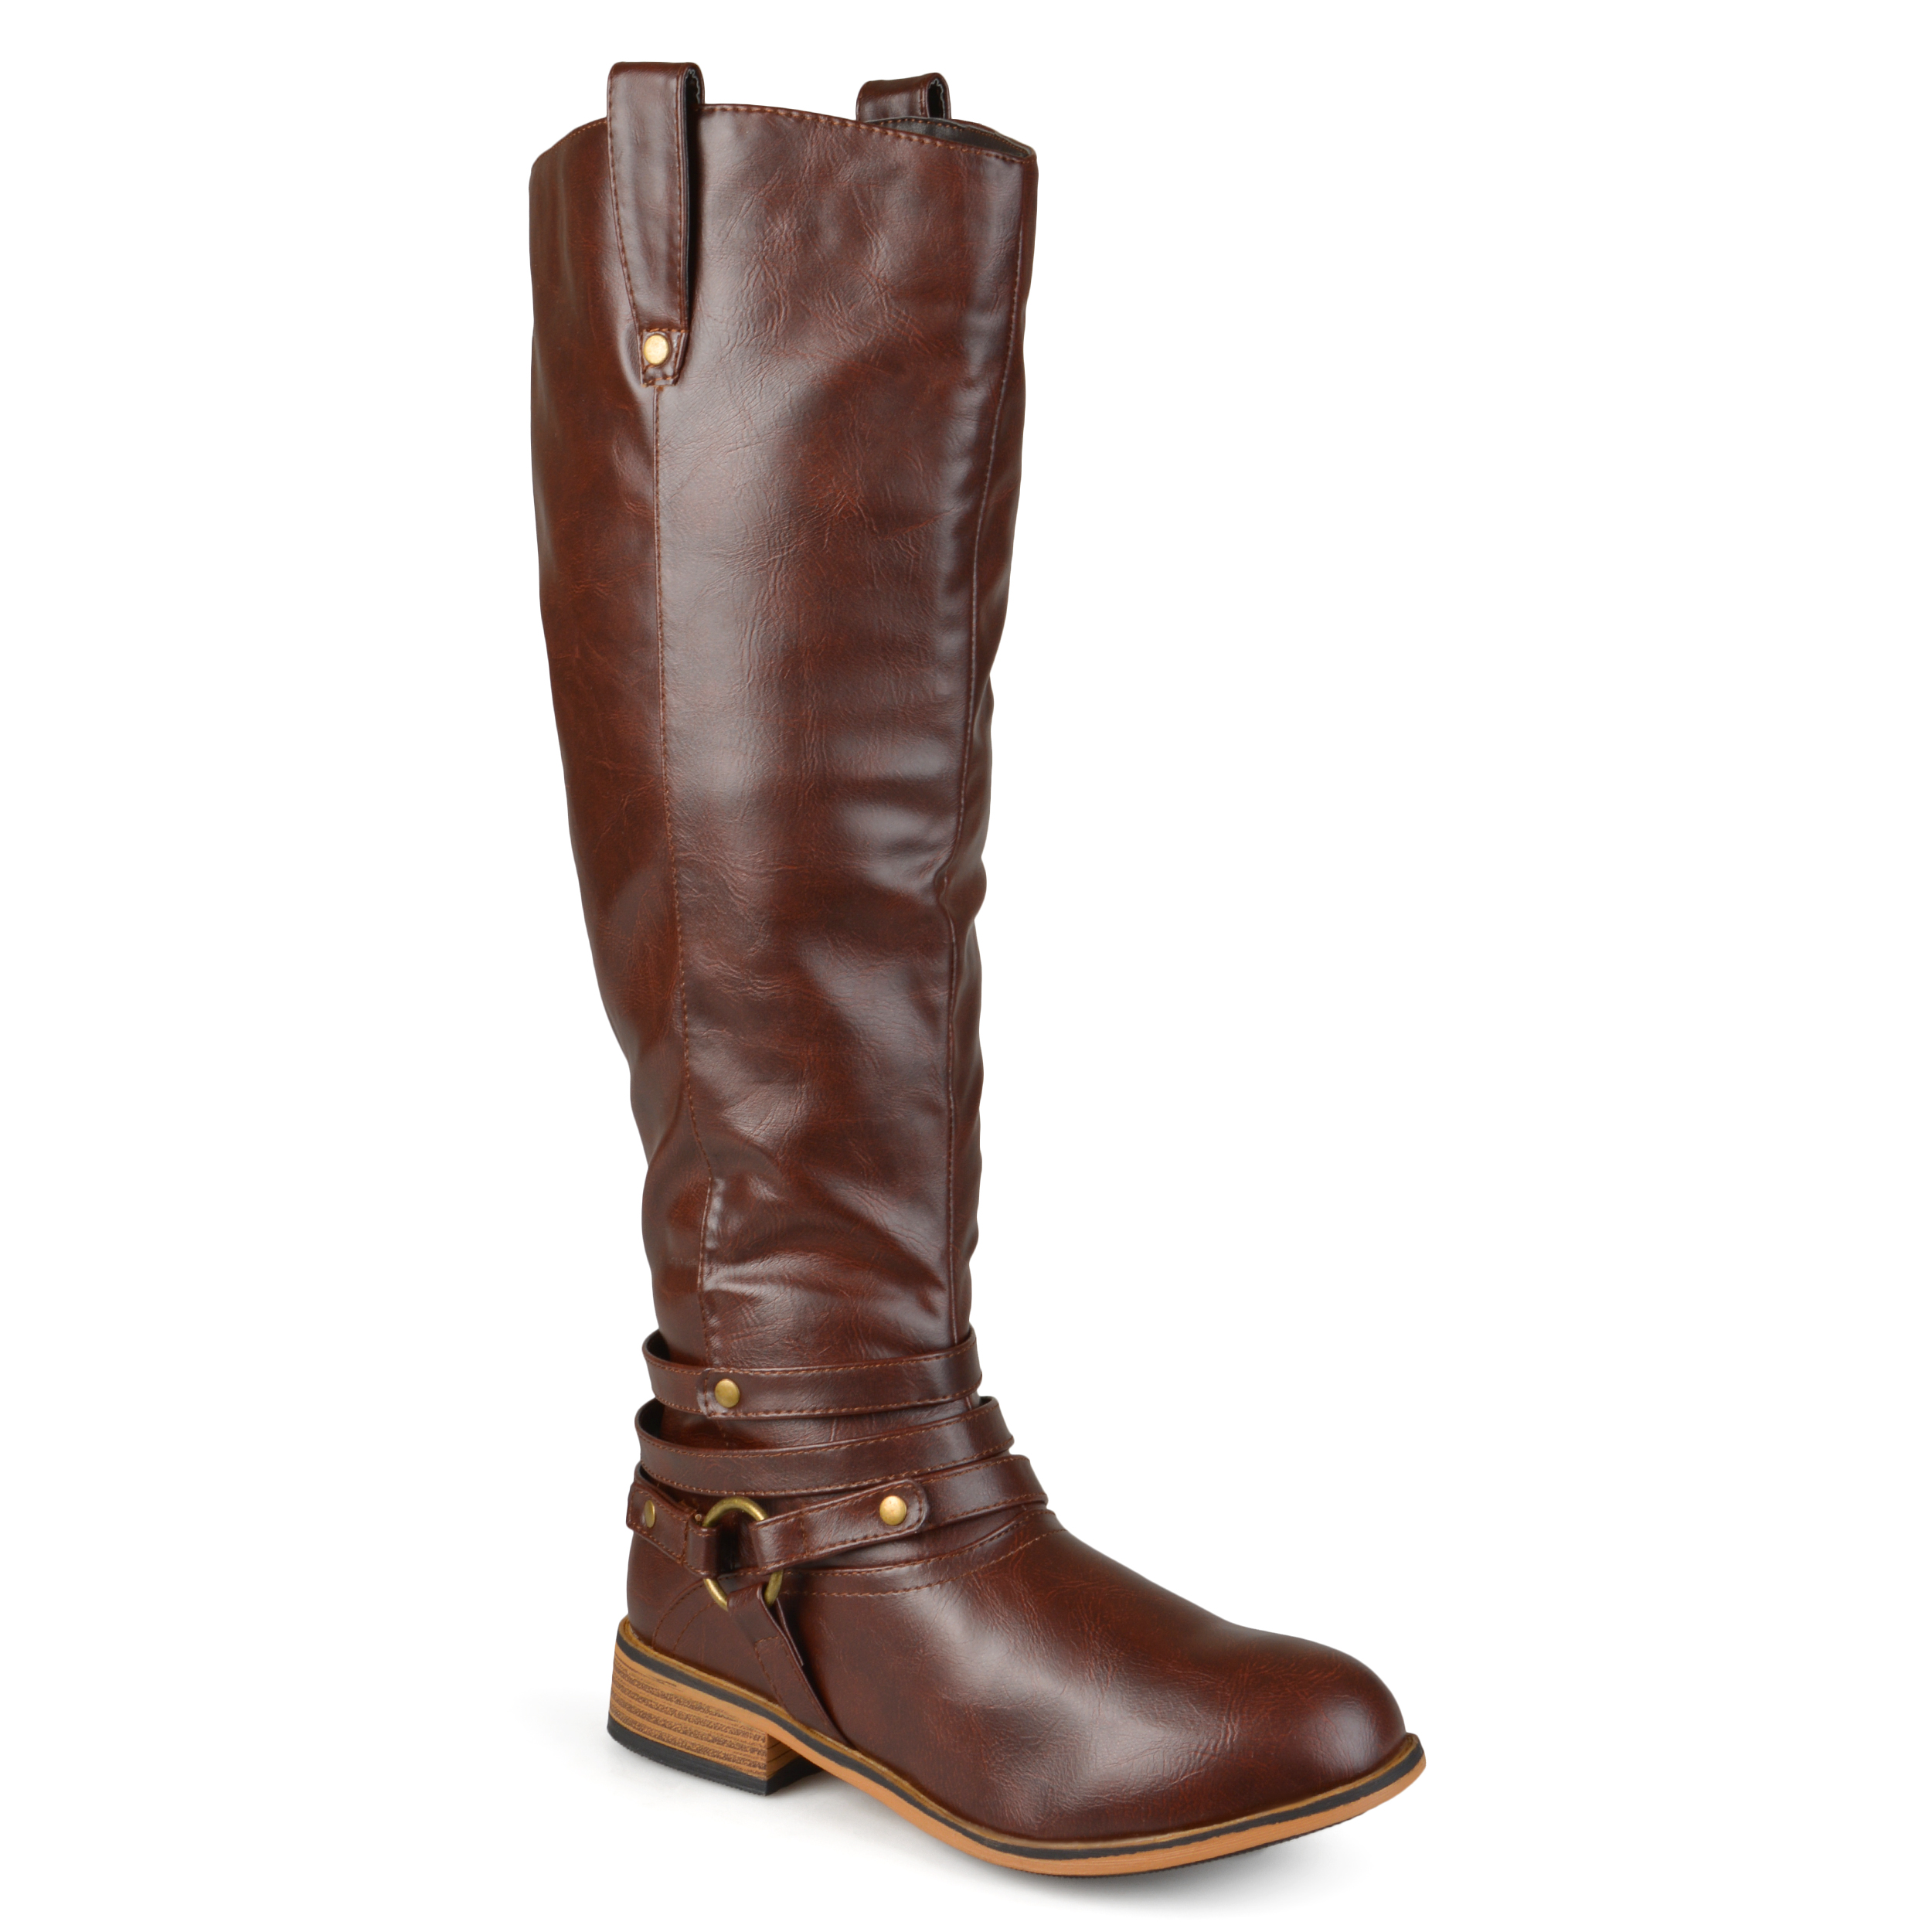 Brinely Co. Women's Mid-calf Wide Calf Riding Boots - image 1 of 9